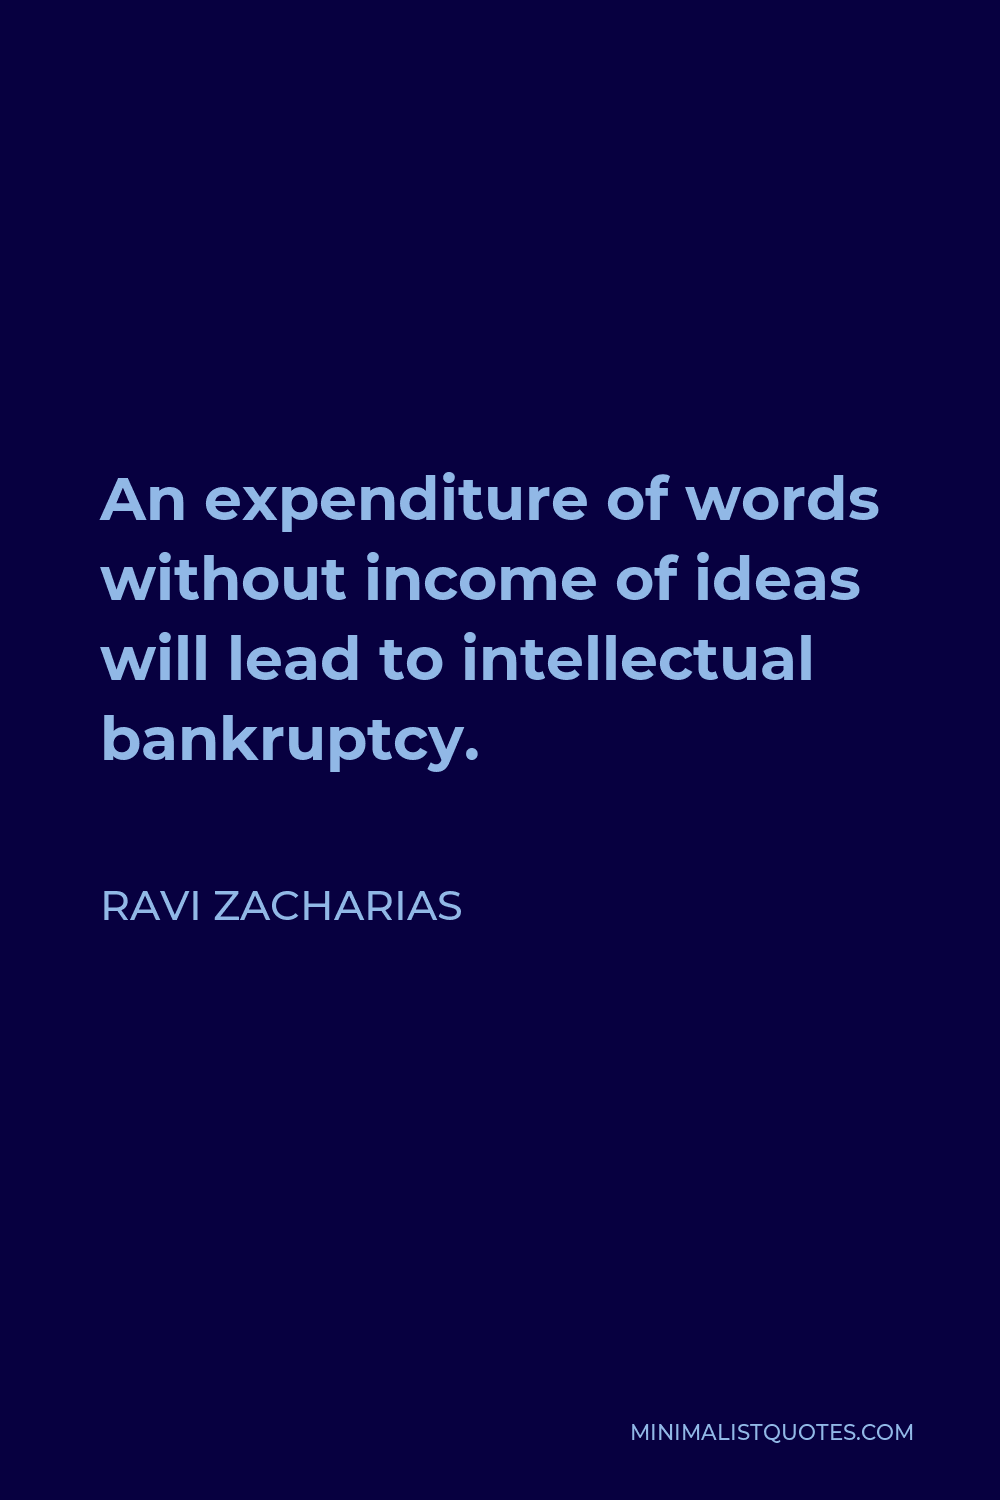 Ravi Zacharias Quote - An expenditure of words without income of ideas will lead to intellectual bankruptcy.